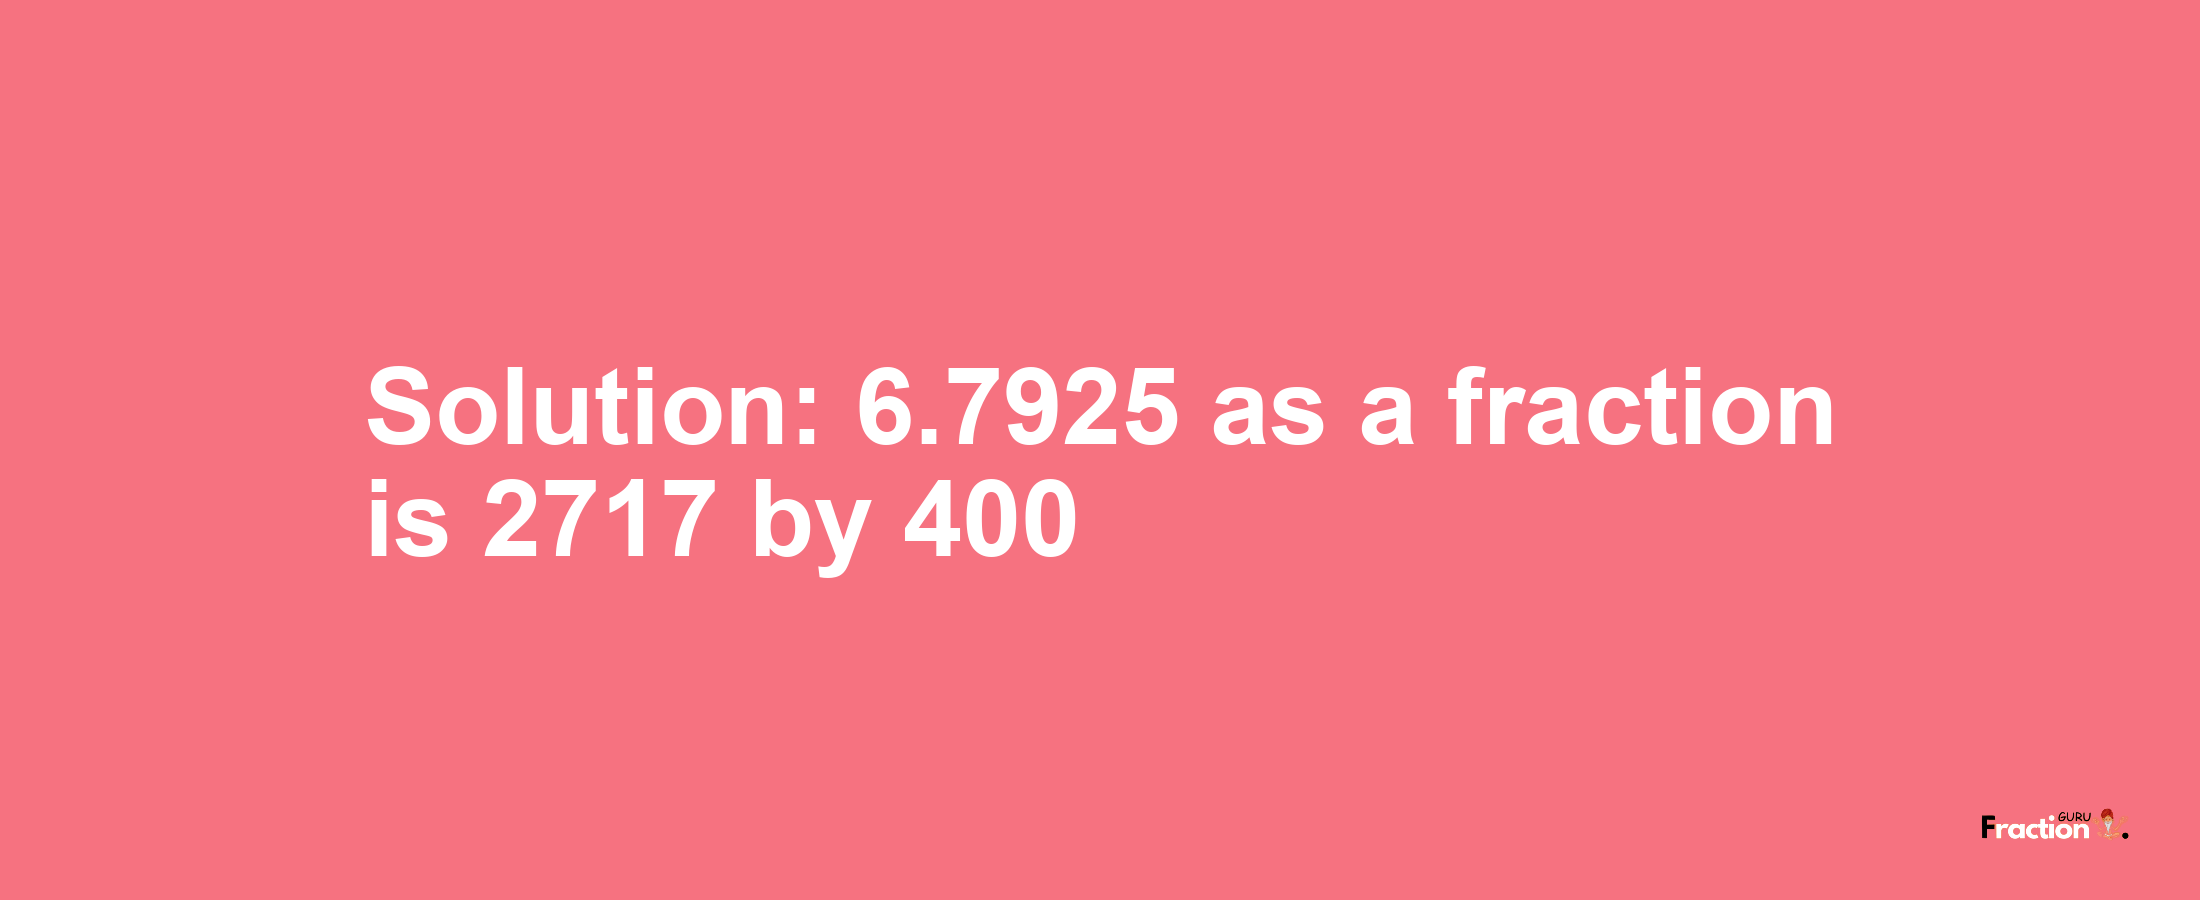 Solution:6.7925 as a fraction is 2717/400